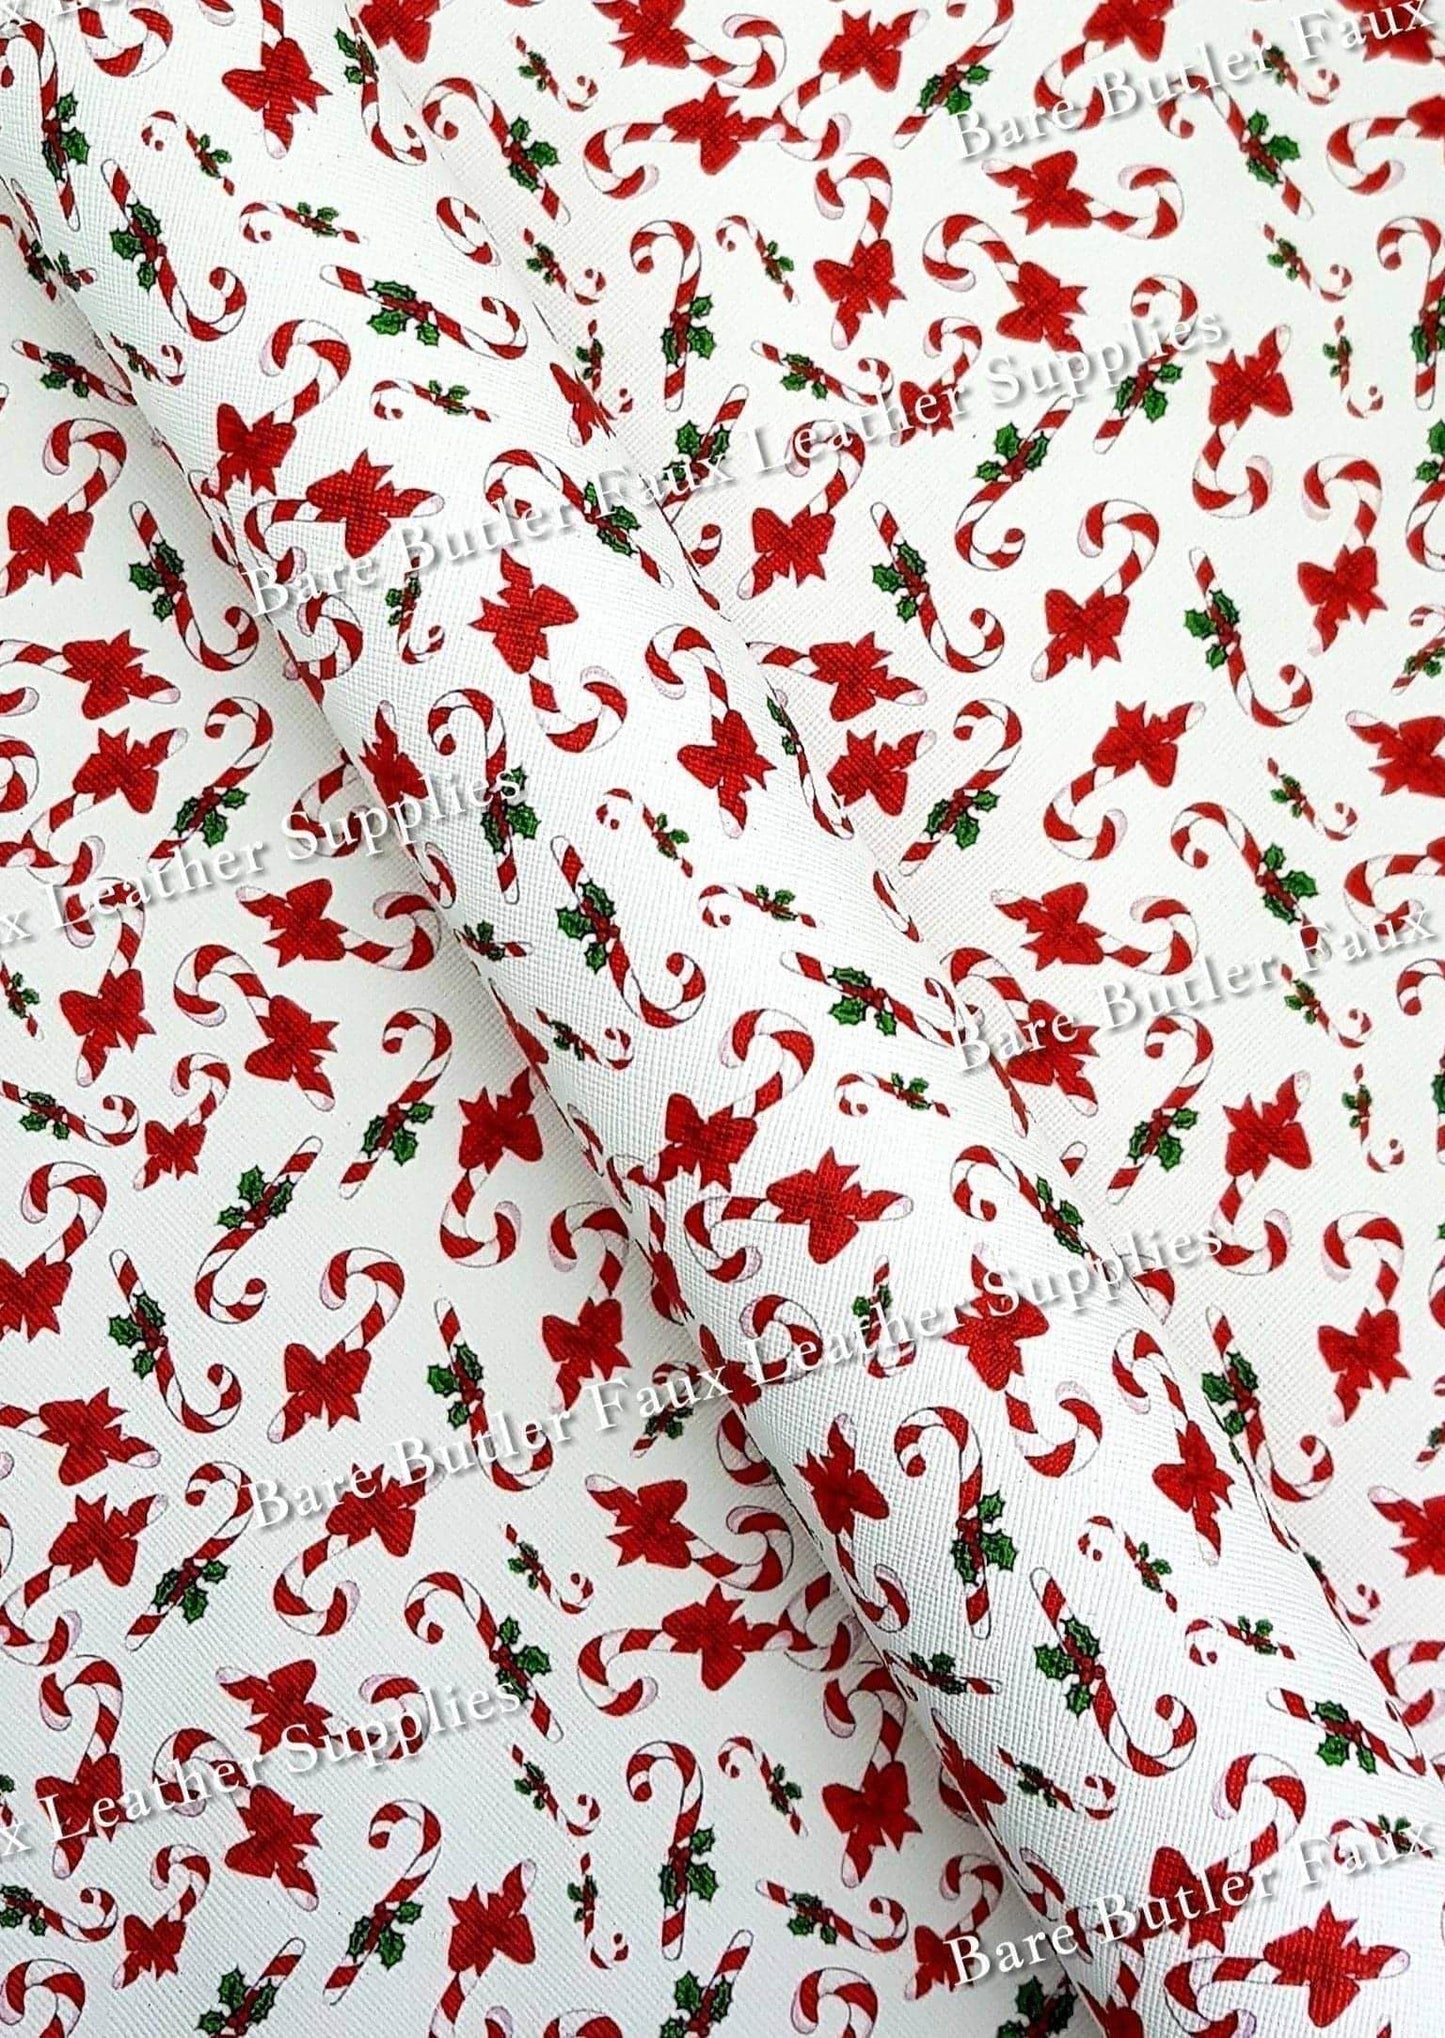 Candy Canes and Bows Faux Leather - candy cane, Candy Canes, candycane, christmas, Faux, Faux Leather, Leather, leatherette, pattern - Bare Butler Faux Leather Supplies 